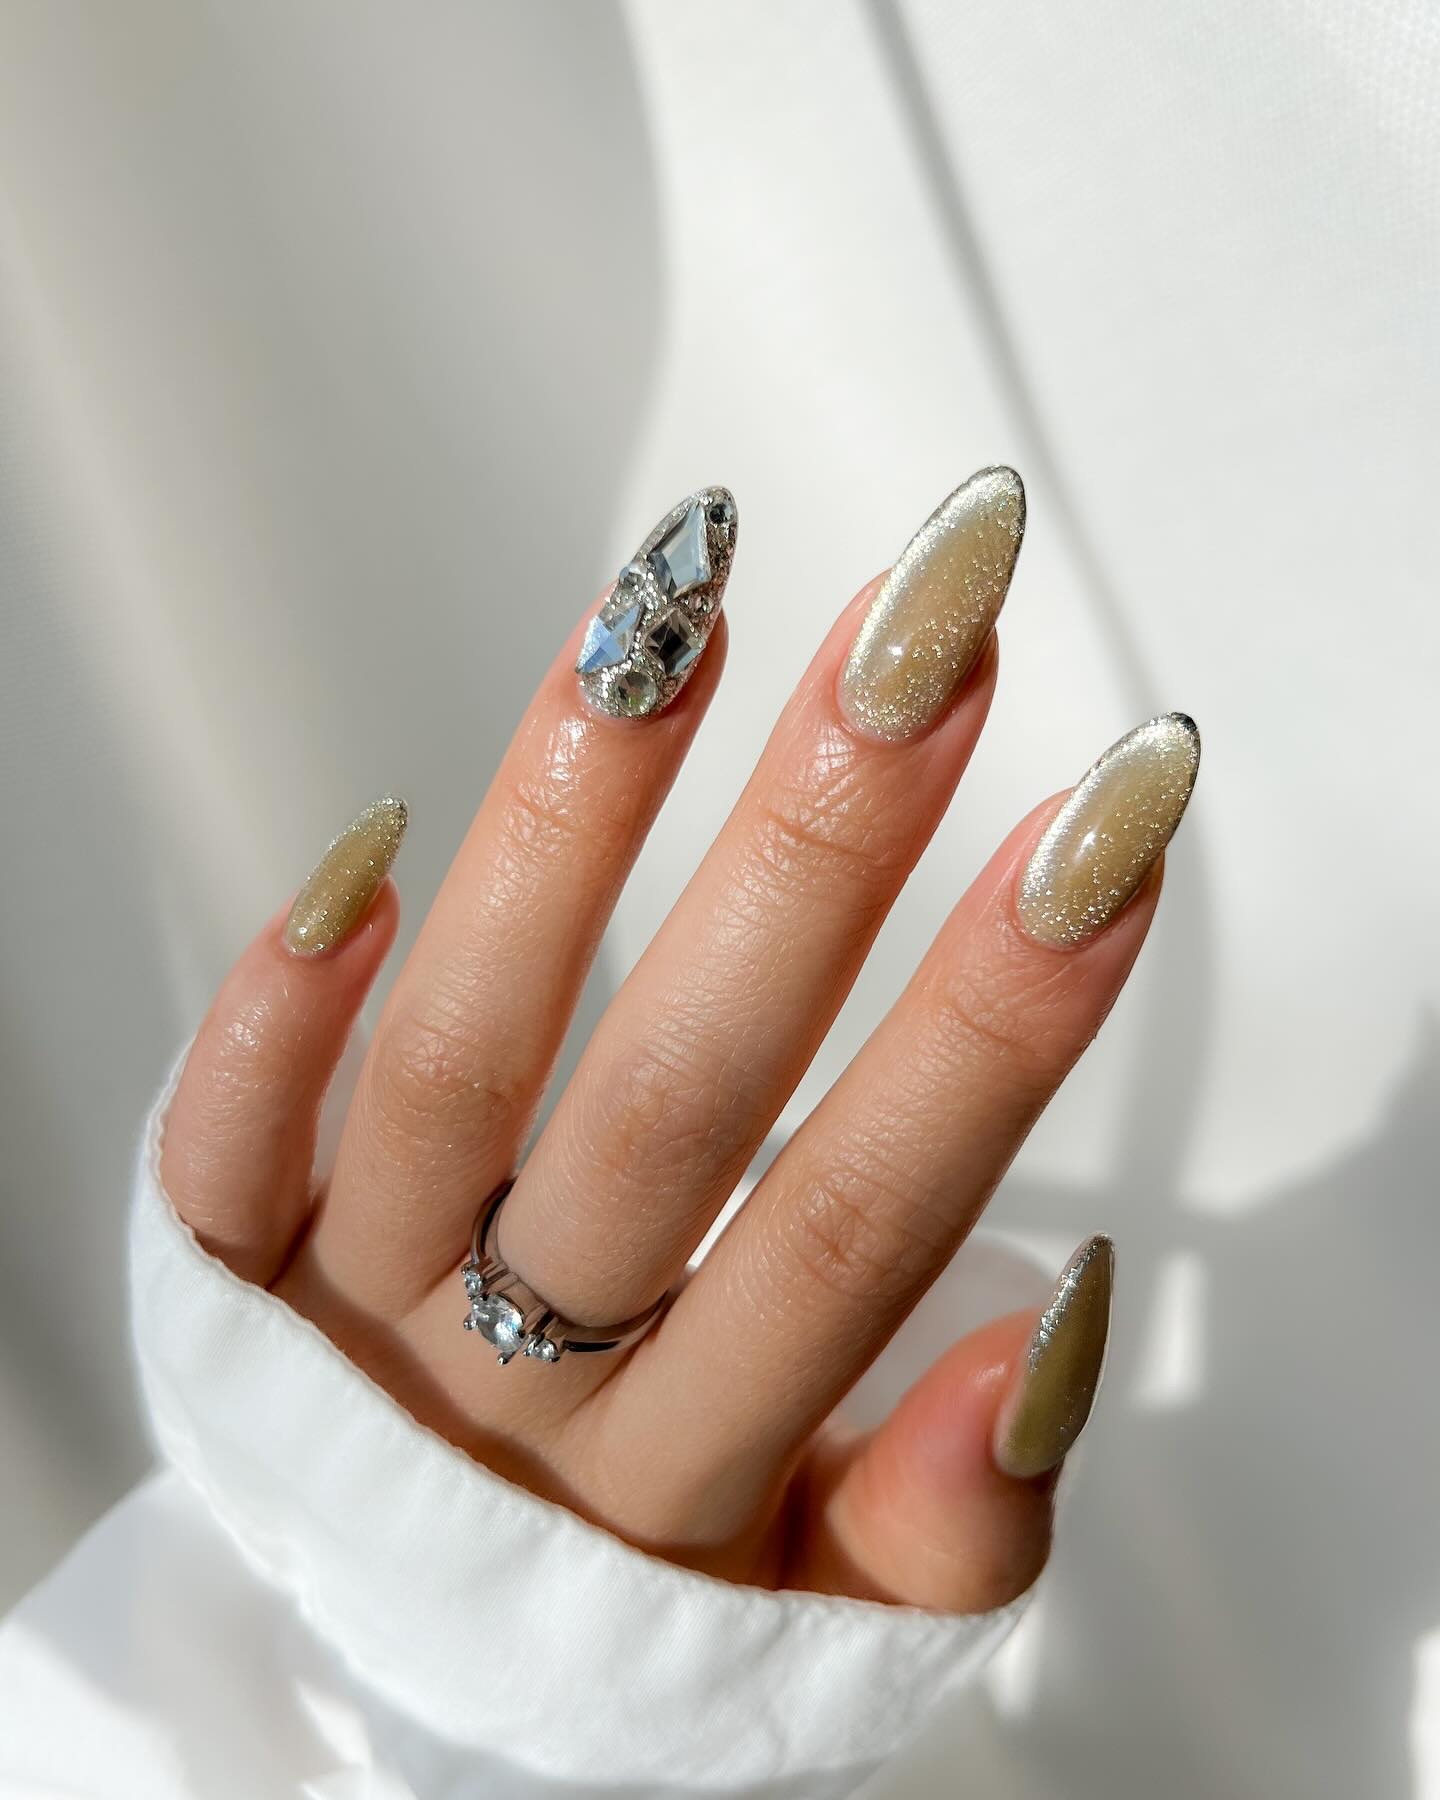 100+ Short Nail Designs You’ll Want To Try This Year images 97